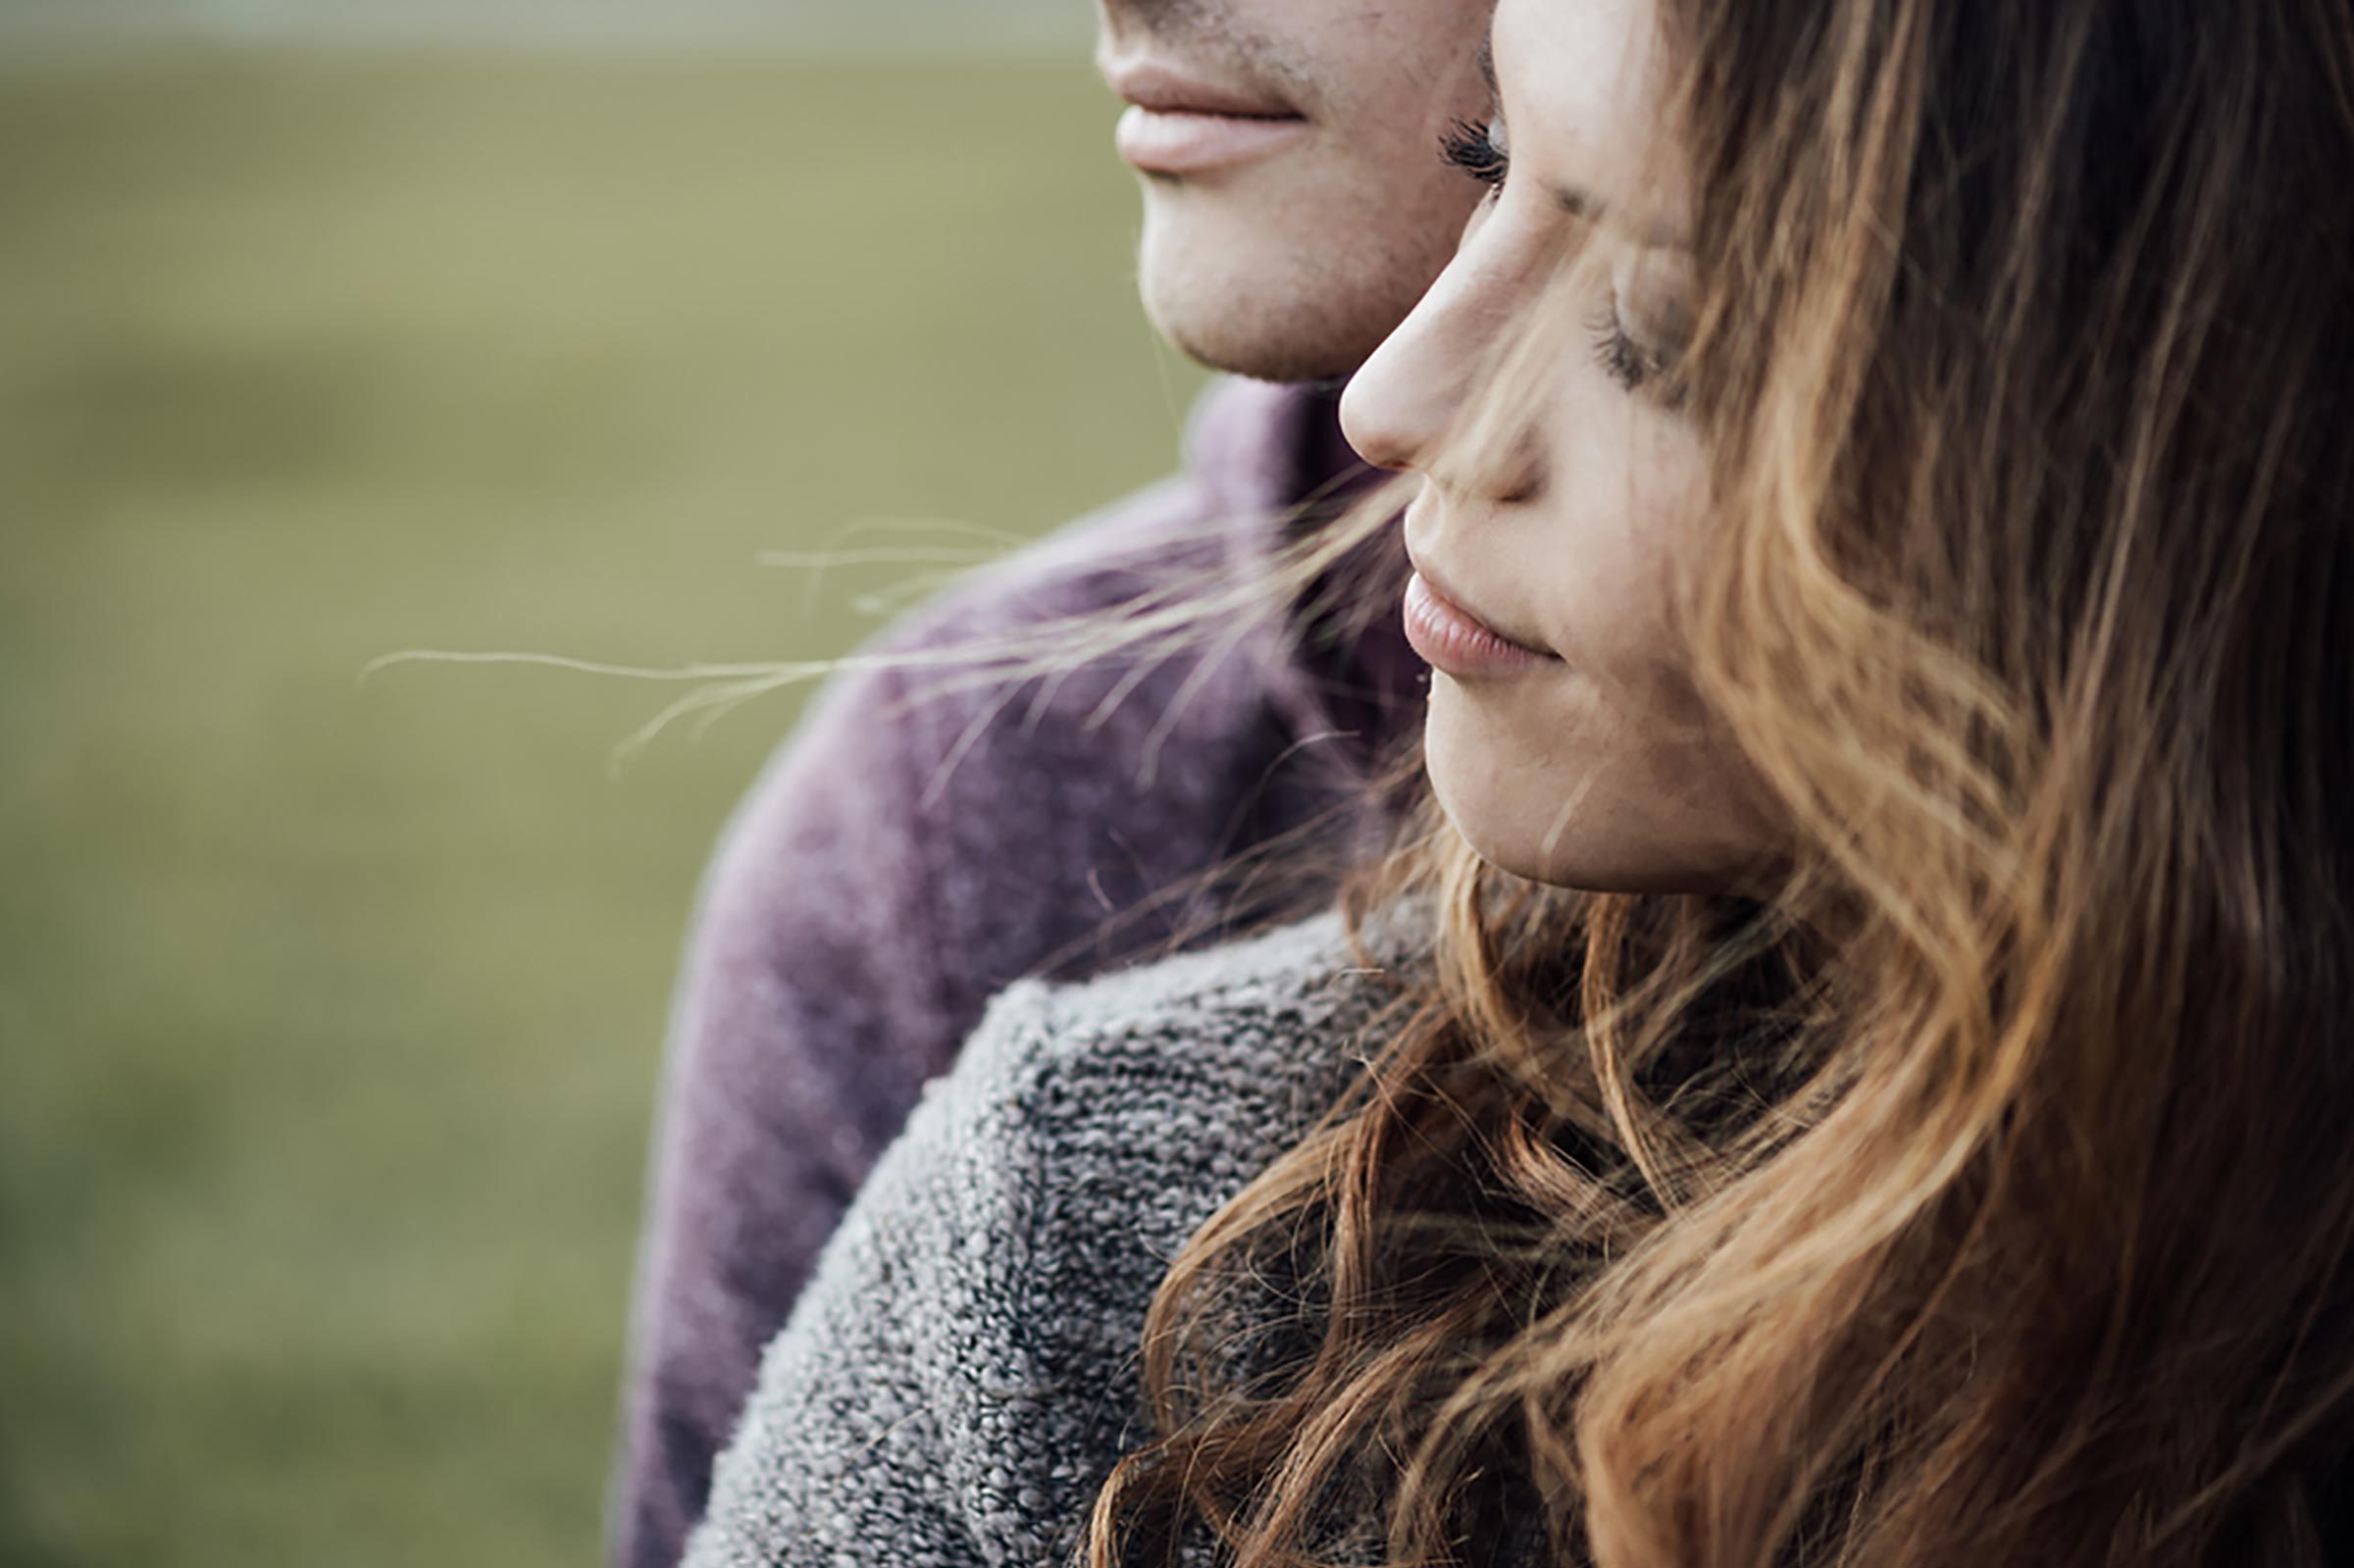 The Most Important Person in Your Relationship May Not Be Your Partner